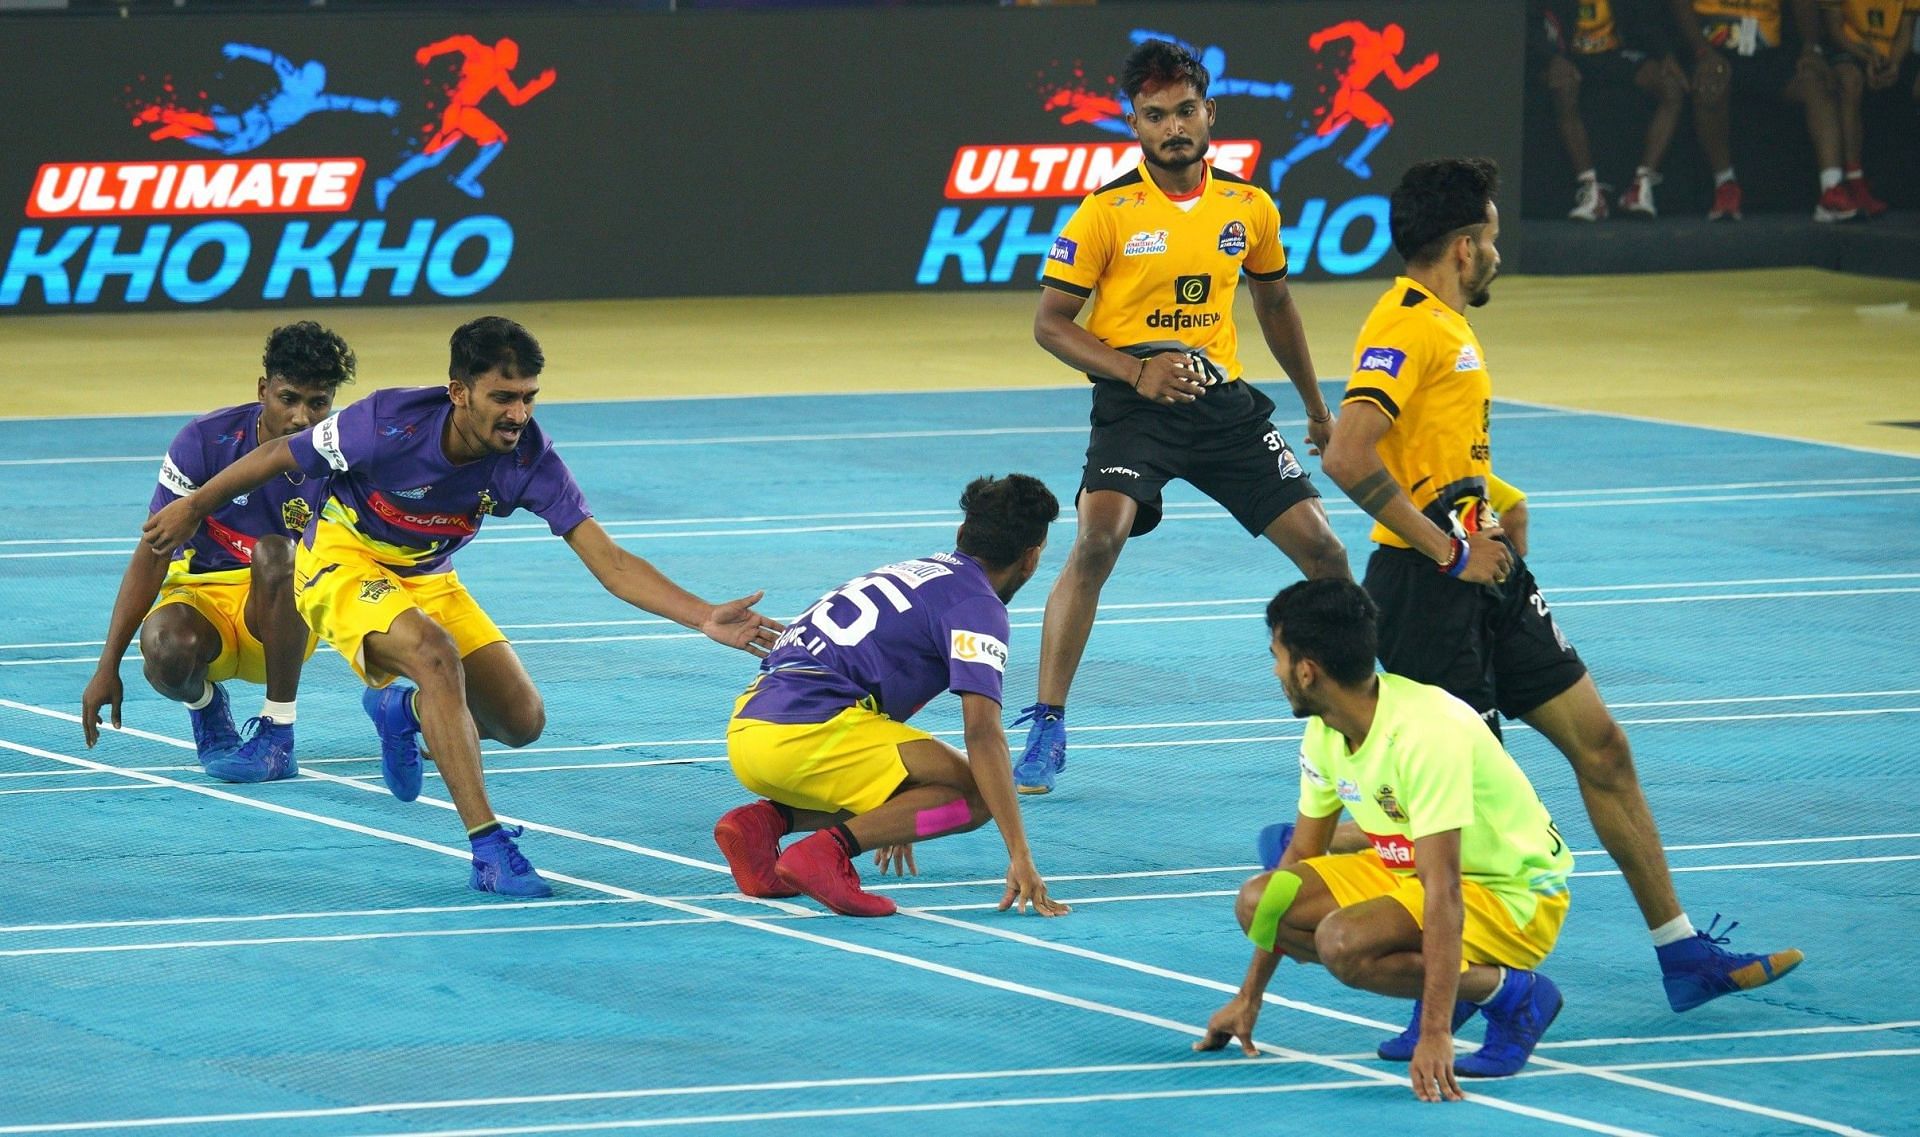 Players in action during an Ultimate Kho Kho Season